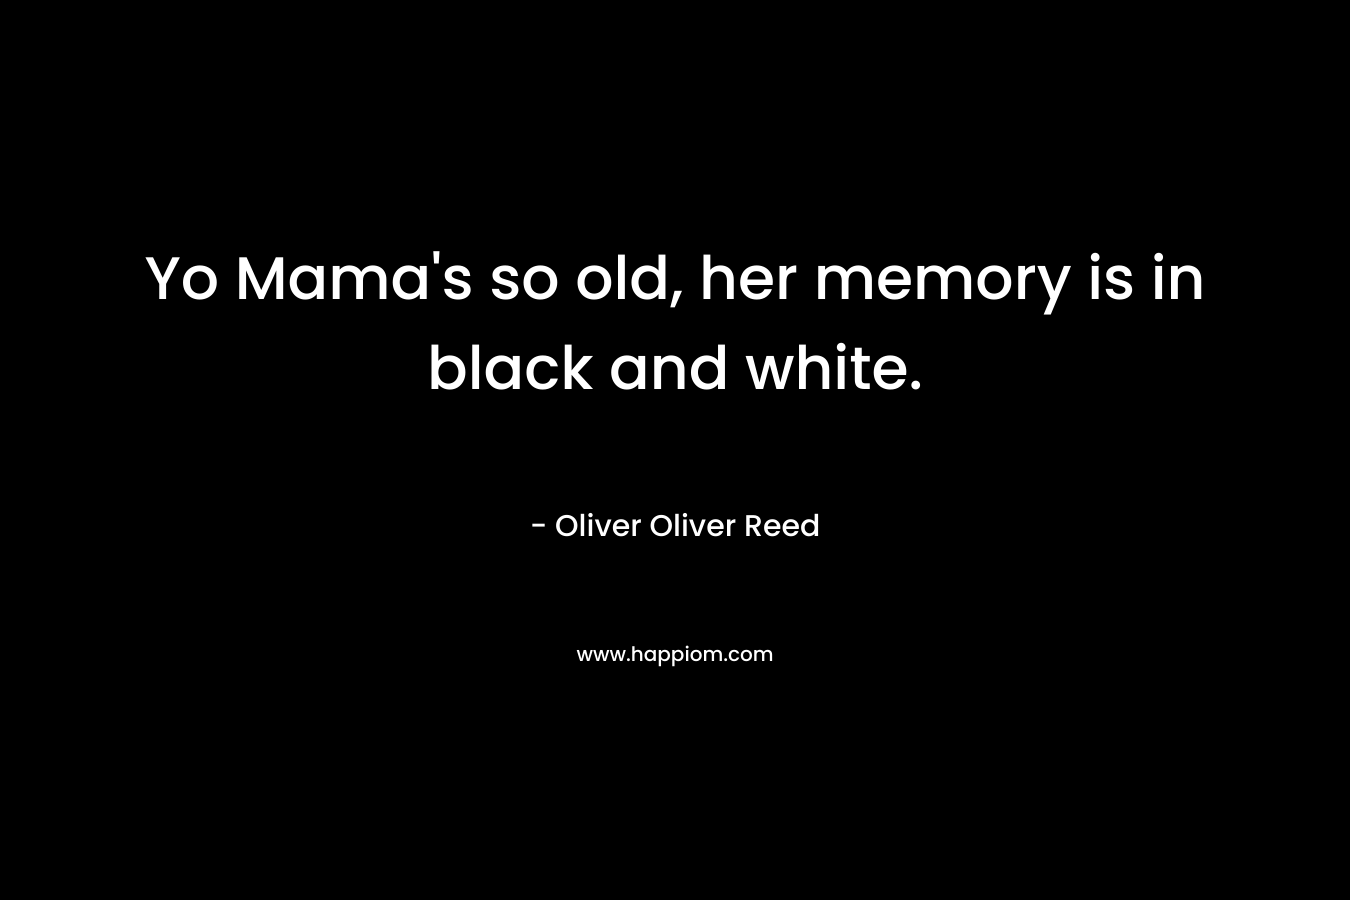 Yo Mama's so old, her memory is in black and white.